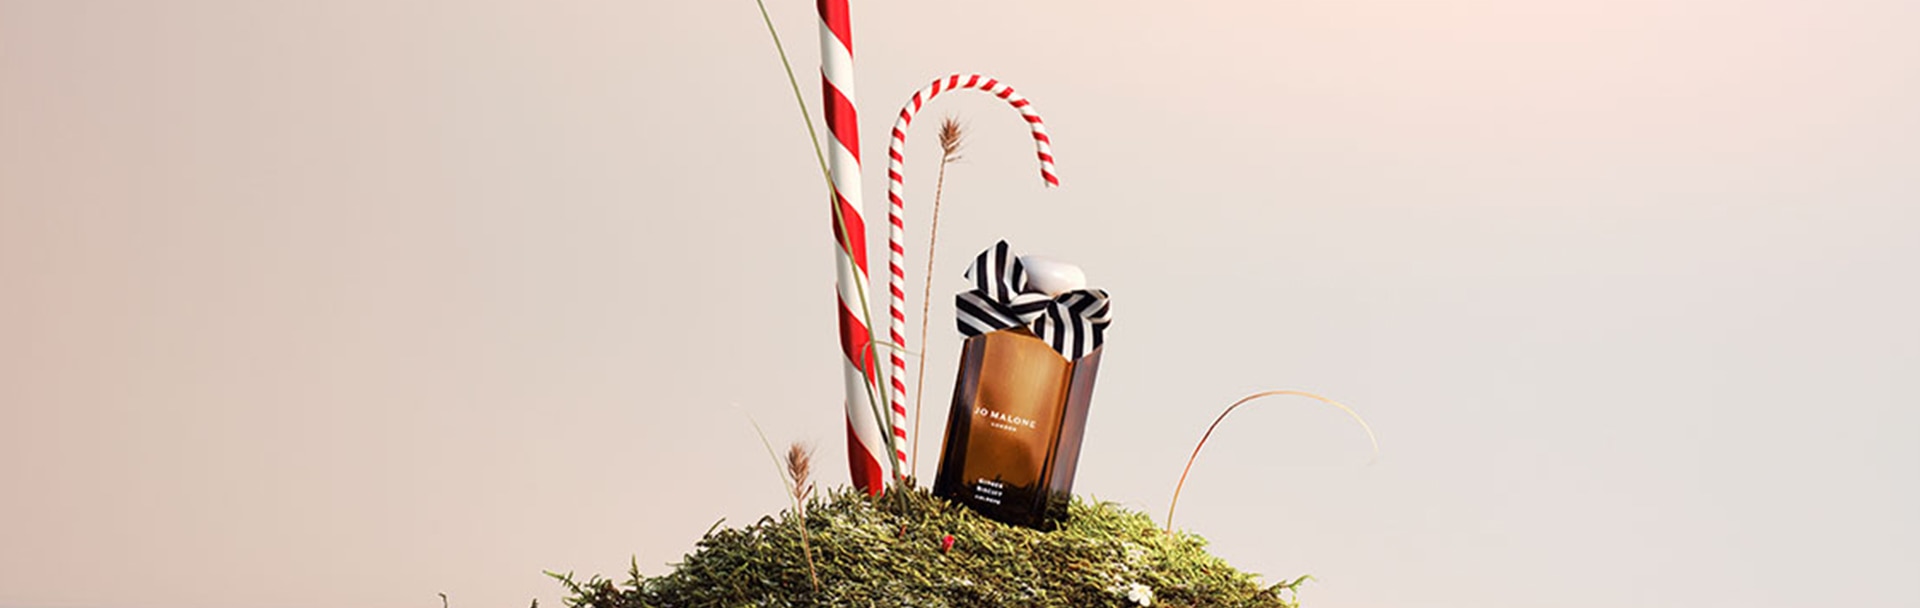 Jo Malone London Ginger Biscuit Collection Candle Cologne on a bed of moss with black and white bows